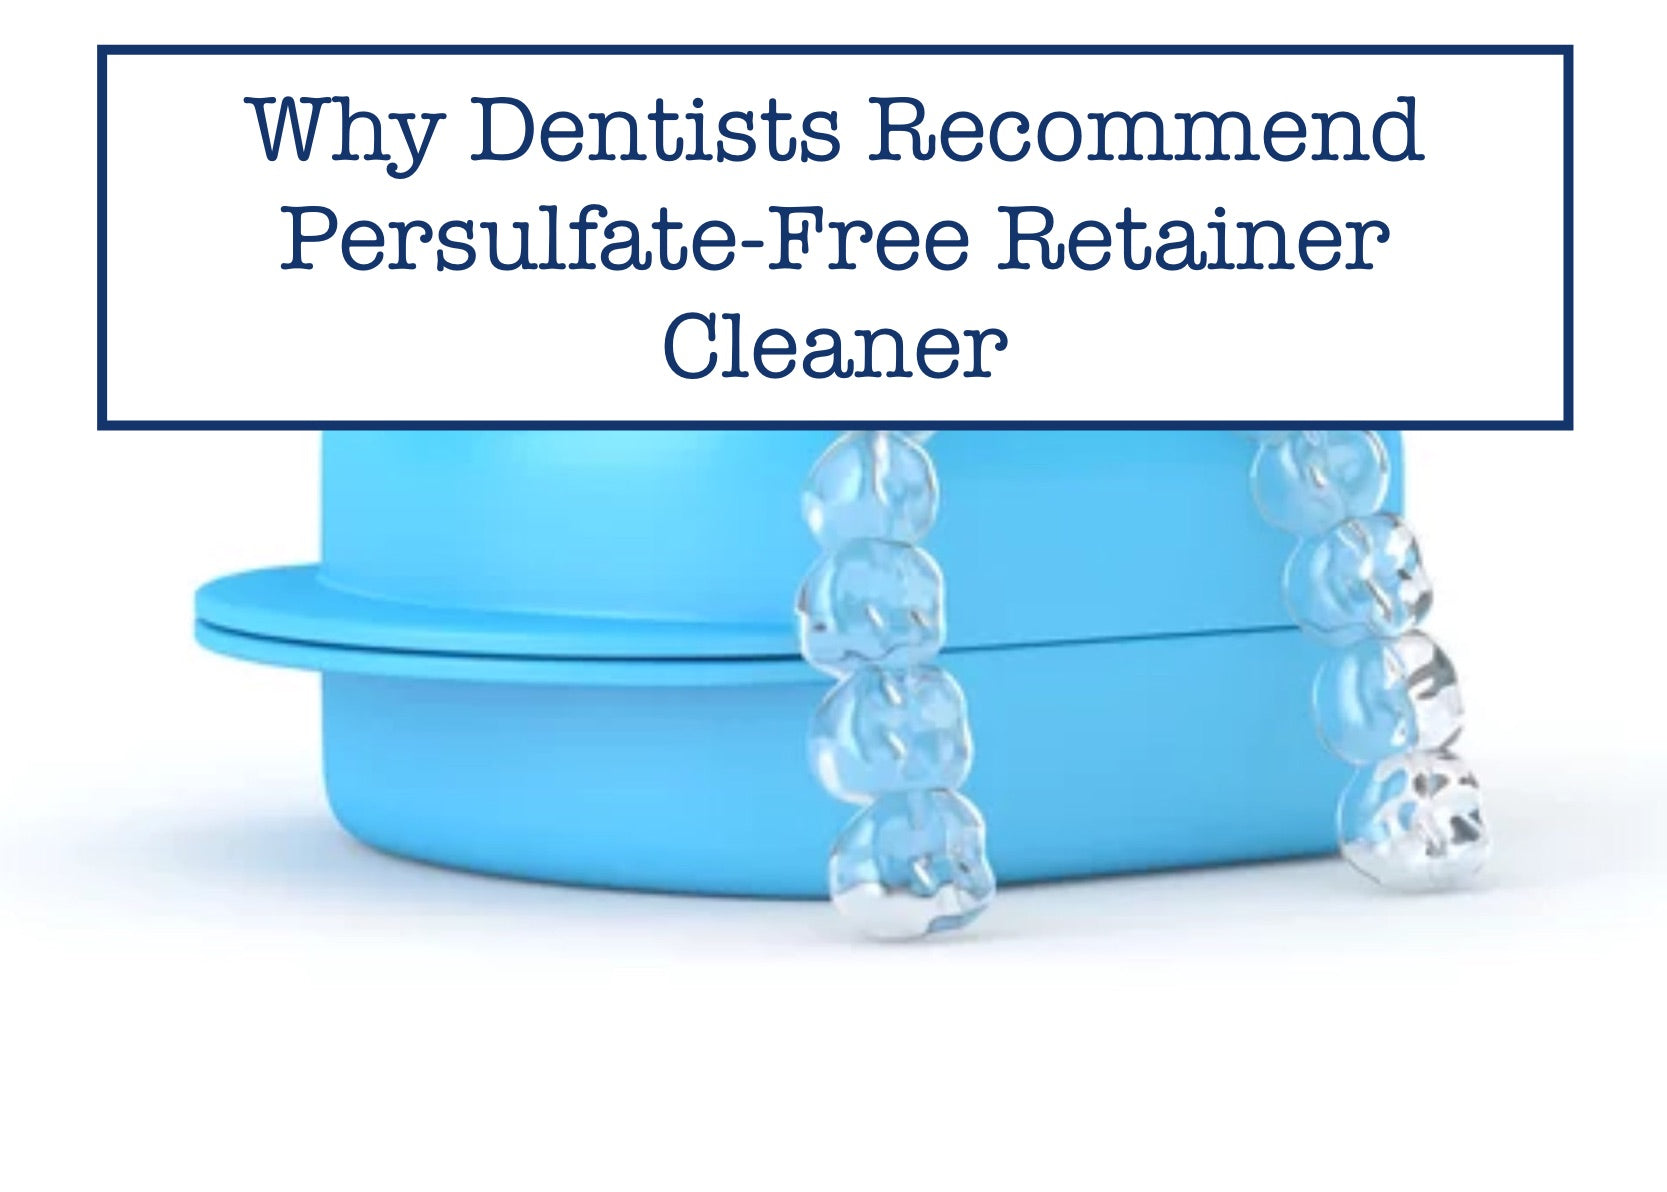 Why Dentists Recommend Persulfate-Free Retainer Cleaner